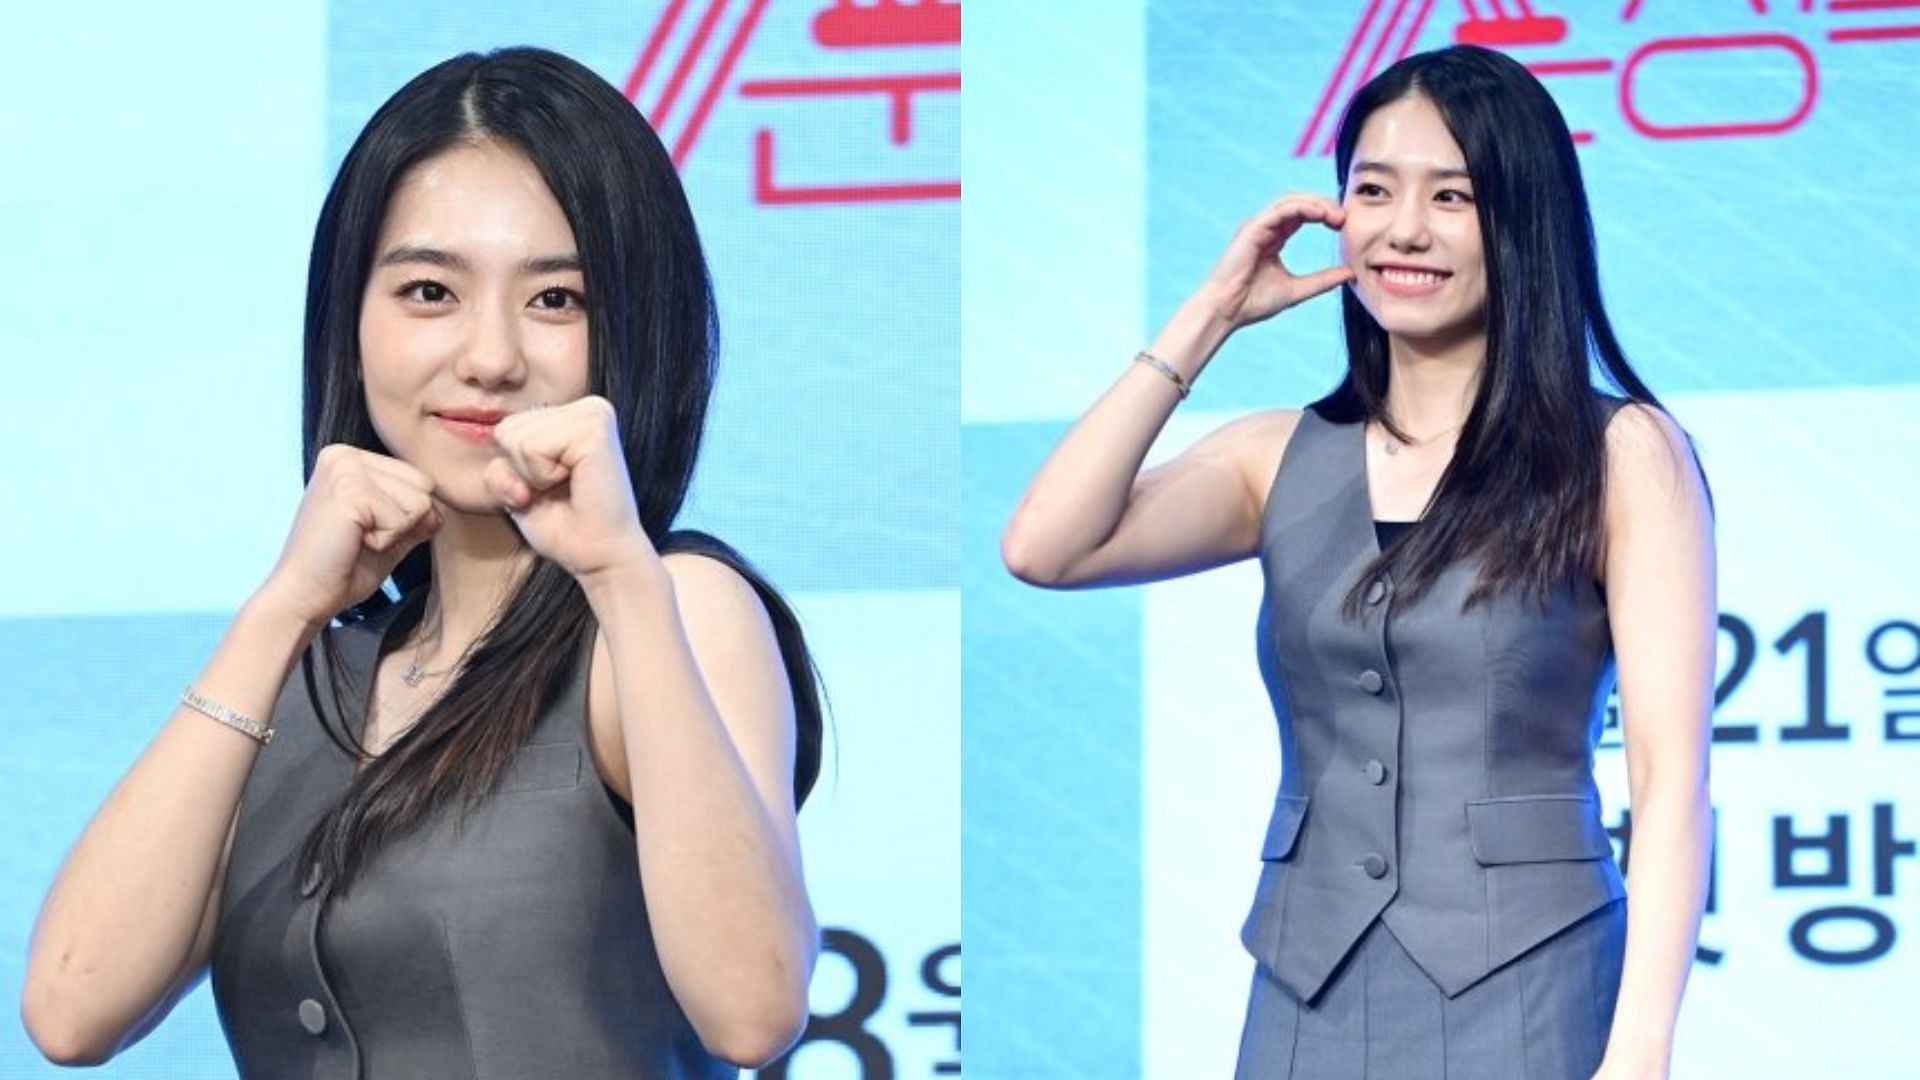 Former I.O.I member Kim So-hye returns to limelight two years after getting embroiled in a bullying controversy (Images via Twitter/SohyeNation)